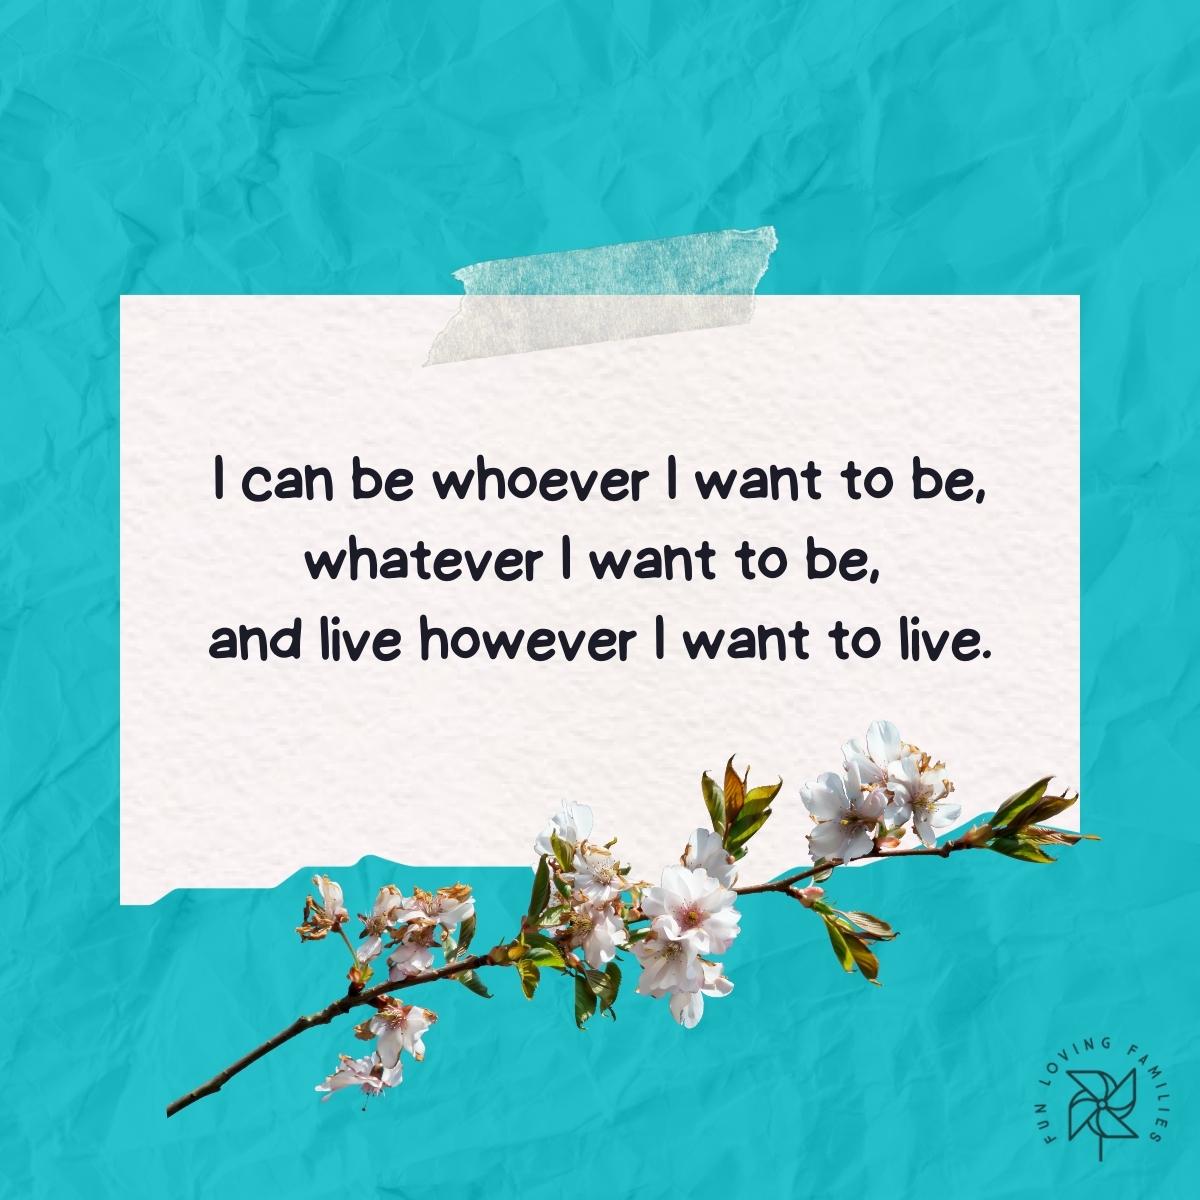 I can be whoever I want to be affirmation